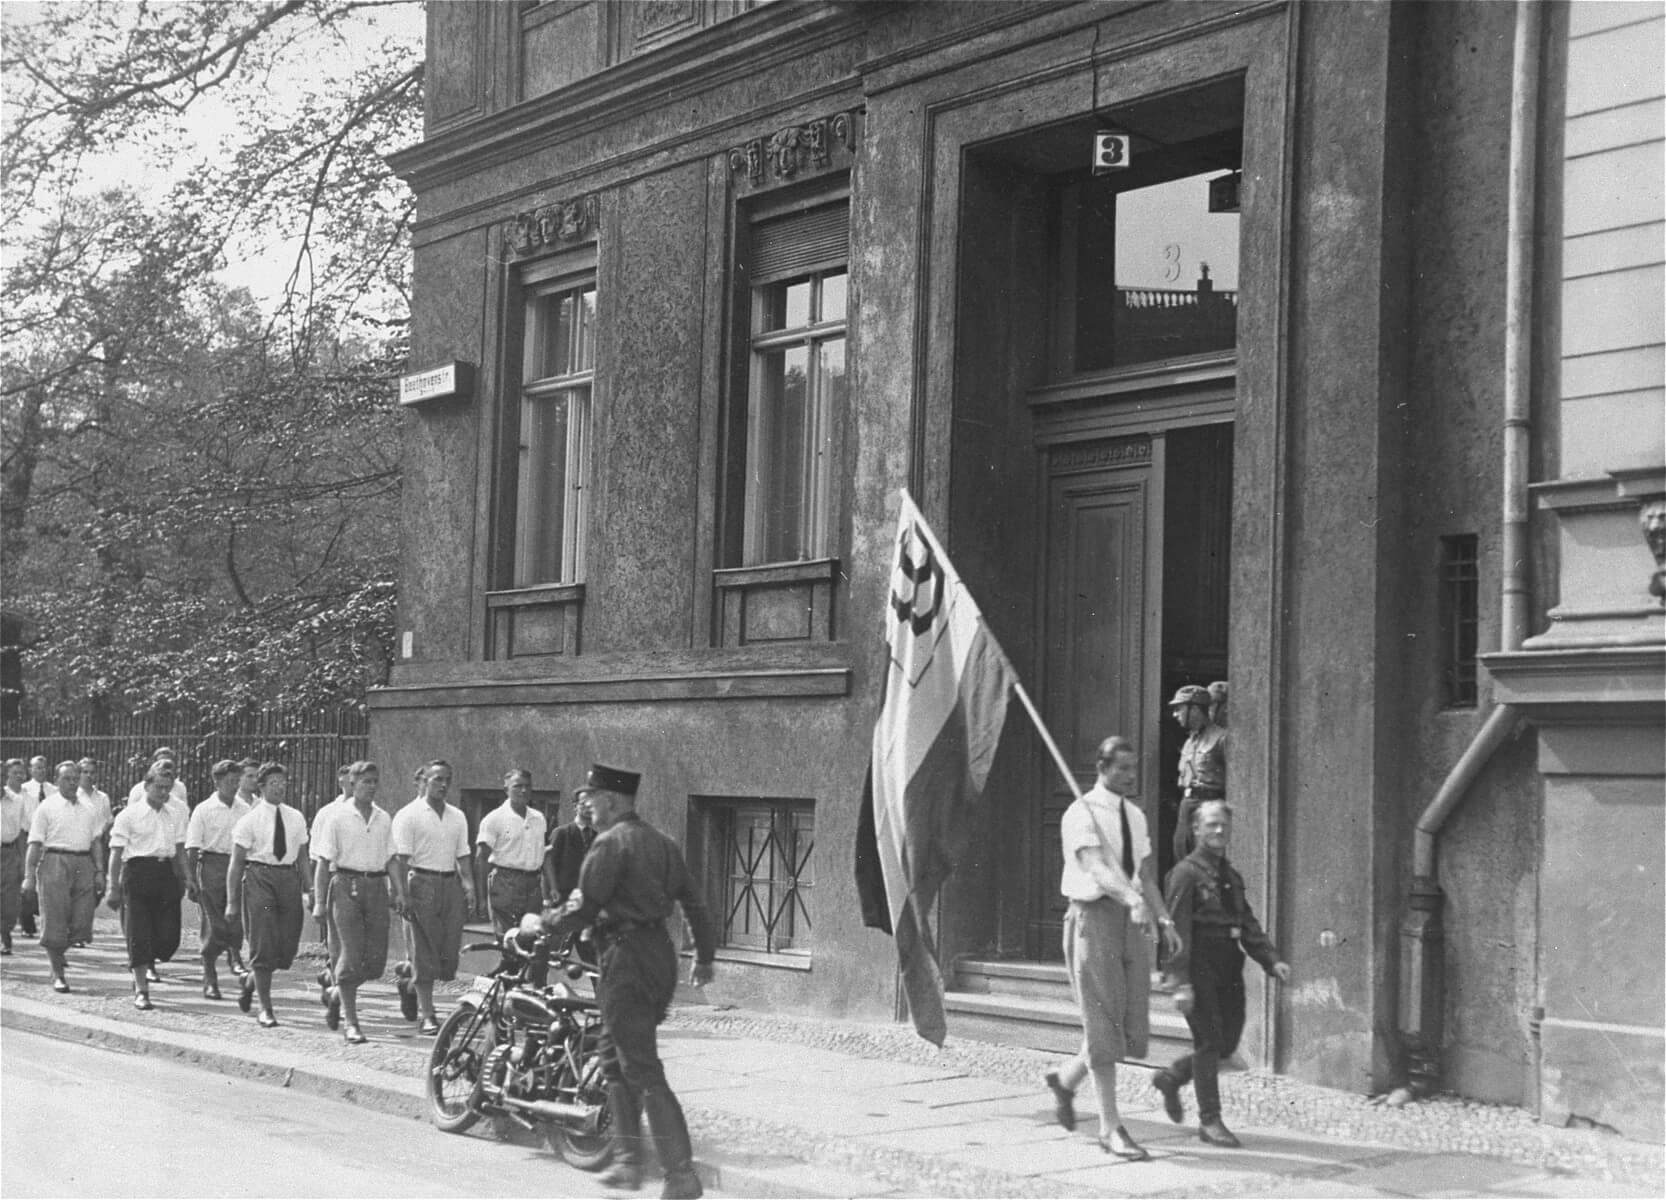 A Nazi student group parades in front of the Institute for Sexual Research shortly before occupying it on May 6, 1933.